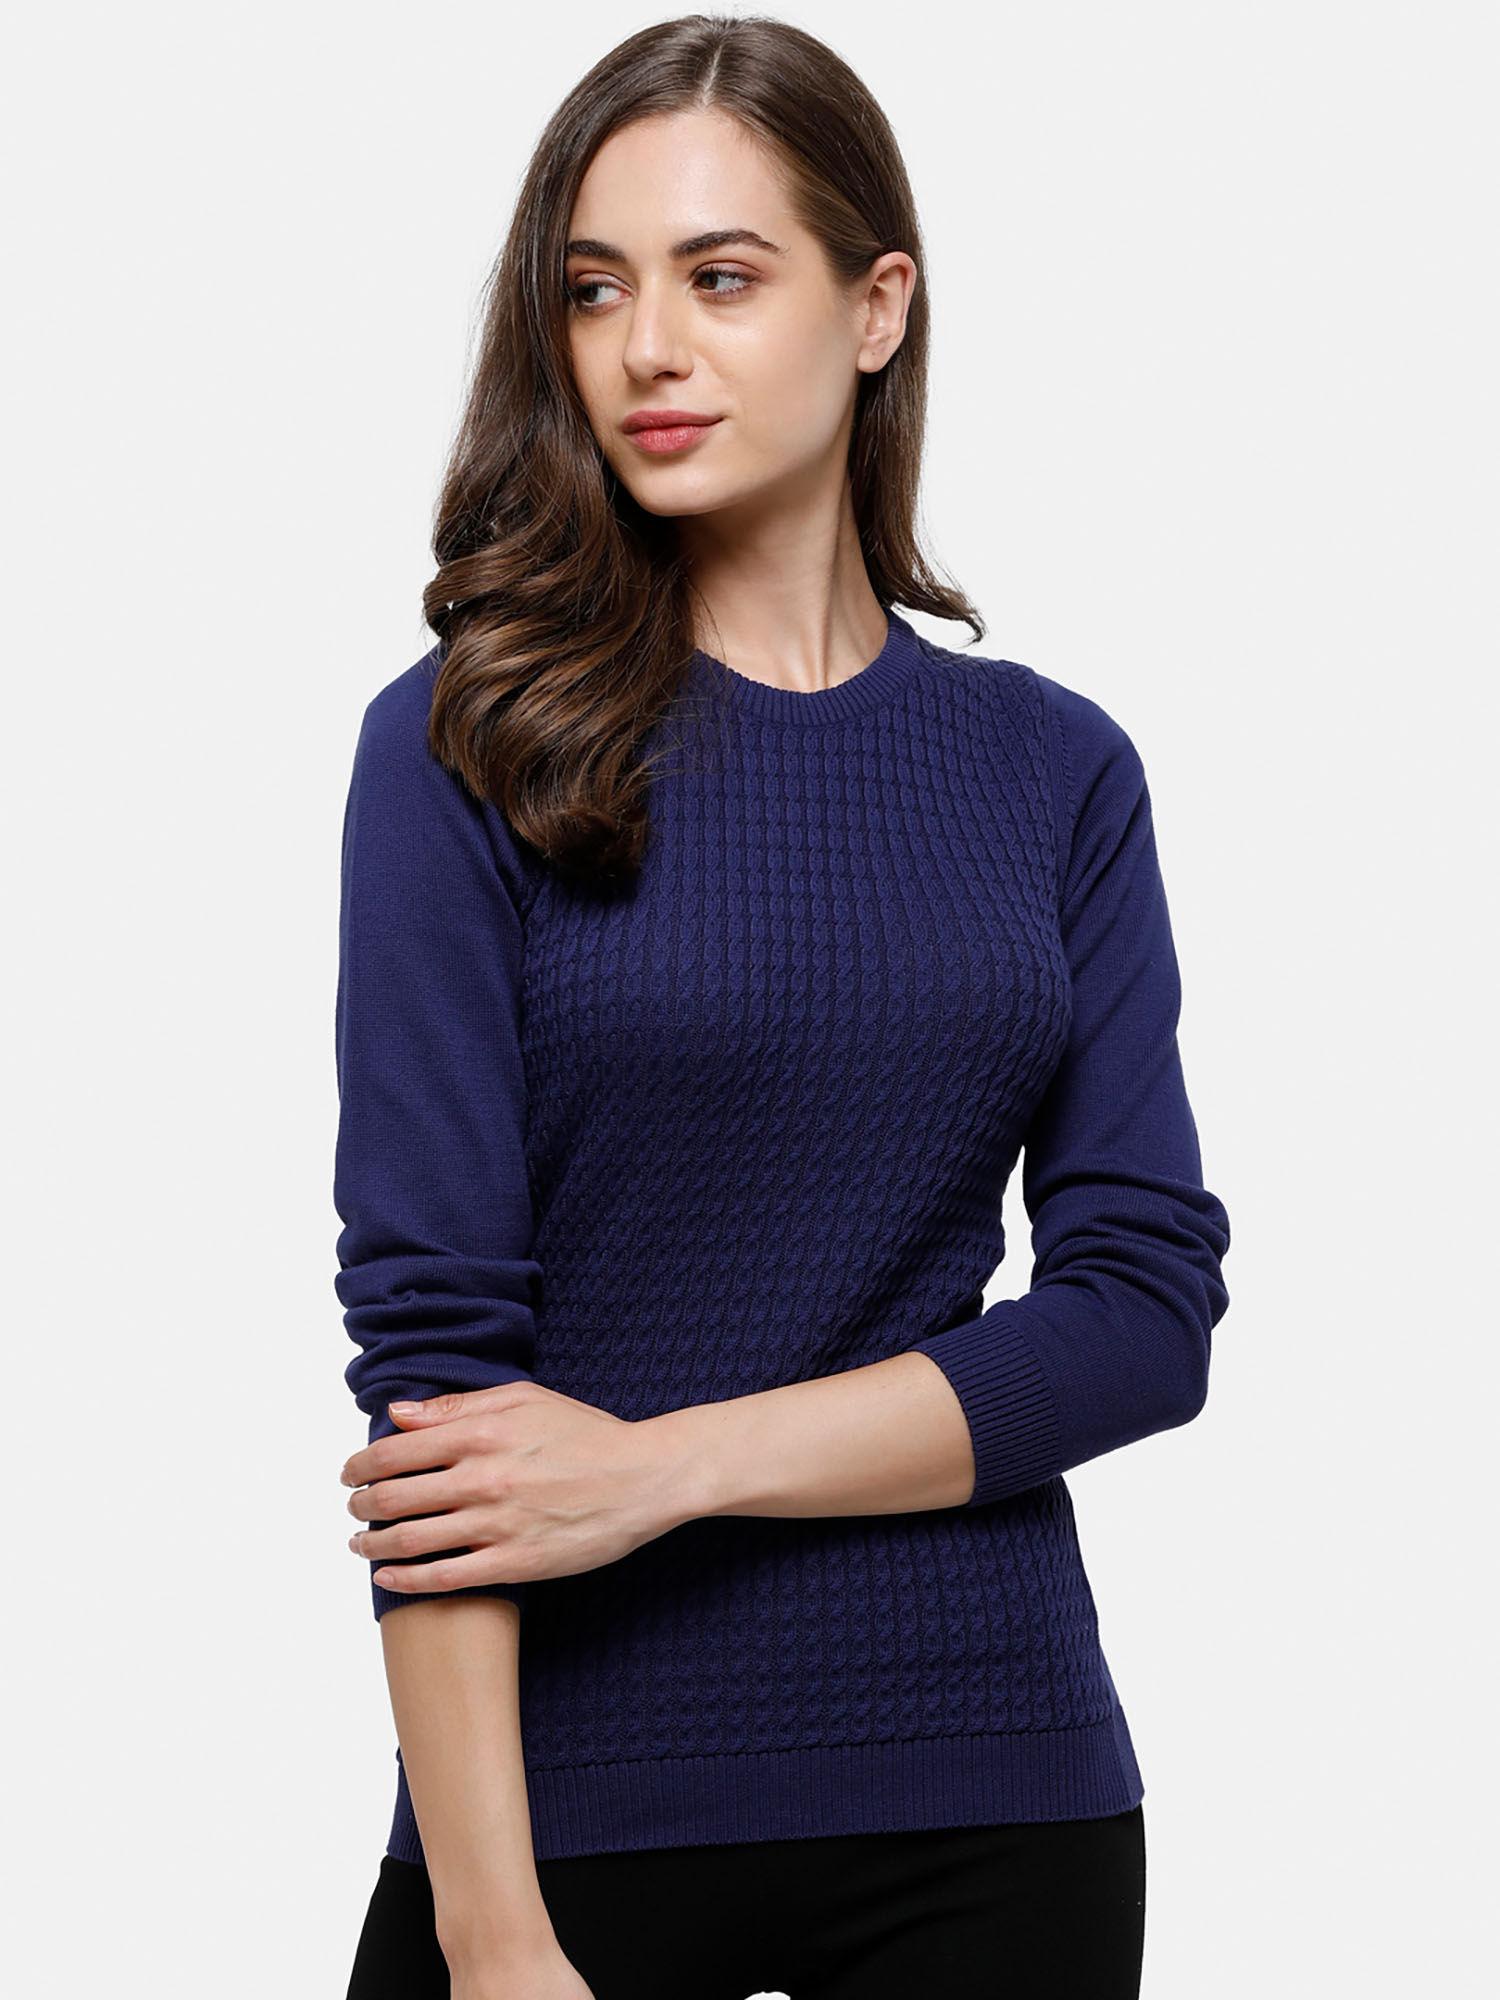 98 degree north's blue full sleeves sweater